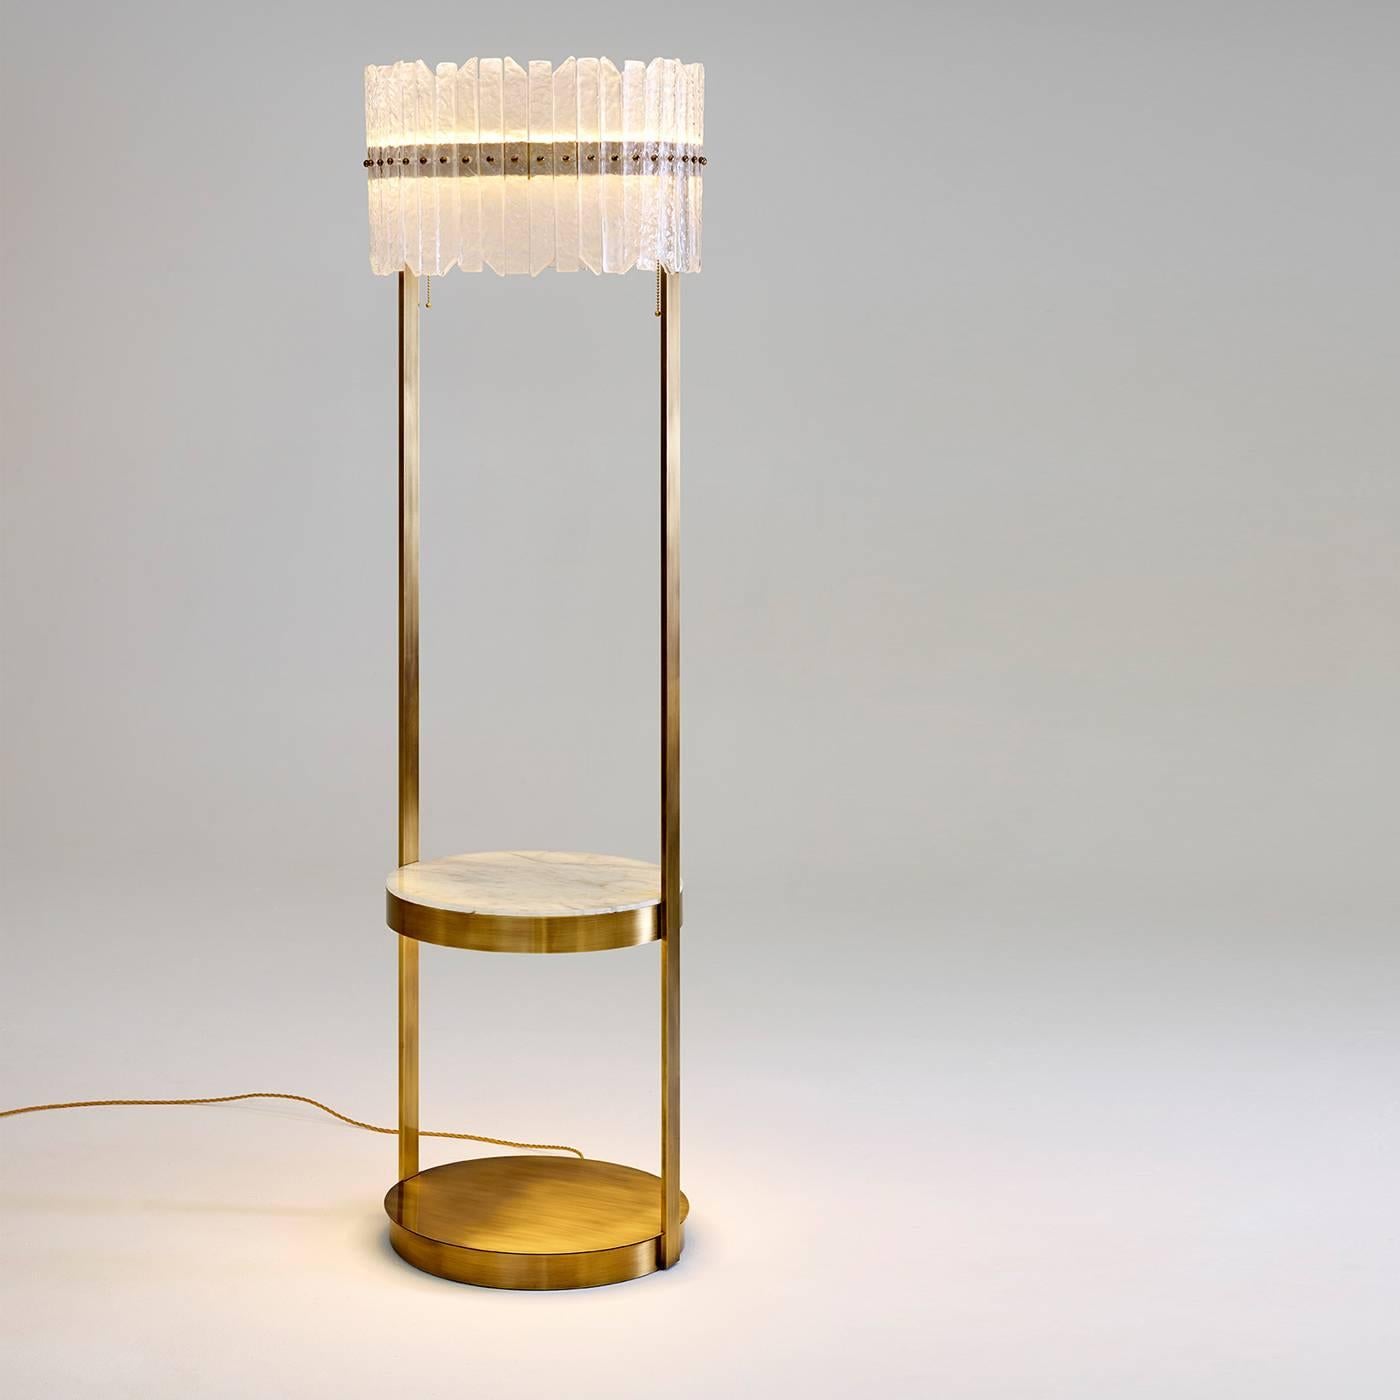 Golden brass uplighter designed by Studio 63 for Marioni. The piece features a small table in the middle and support at the base, both circular, as well as a back-lighting and decorative glass.